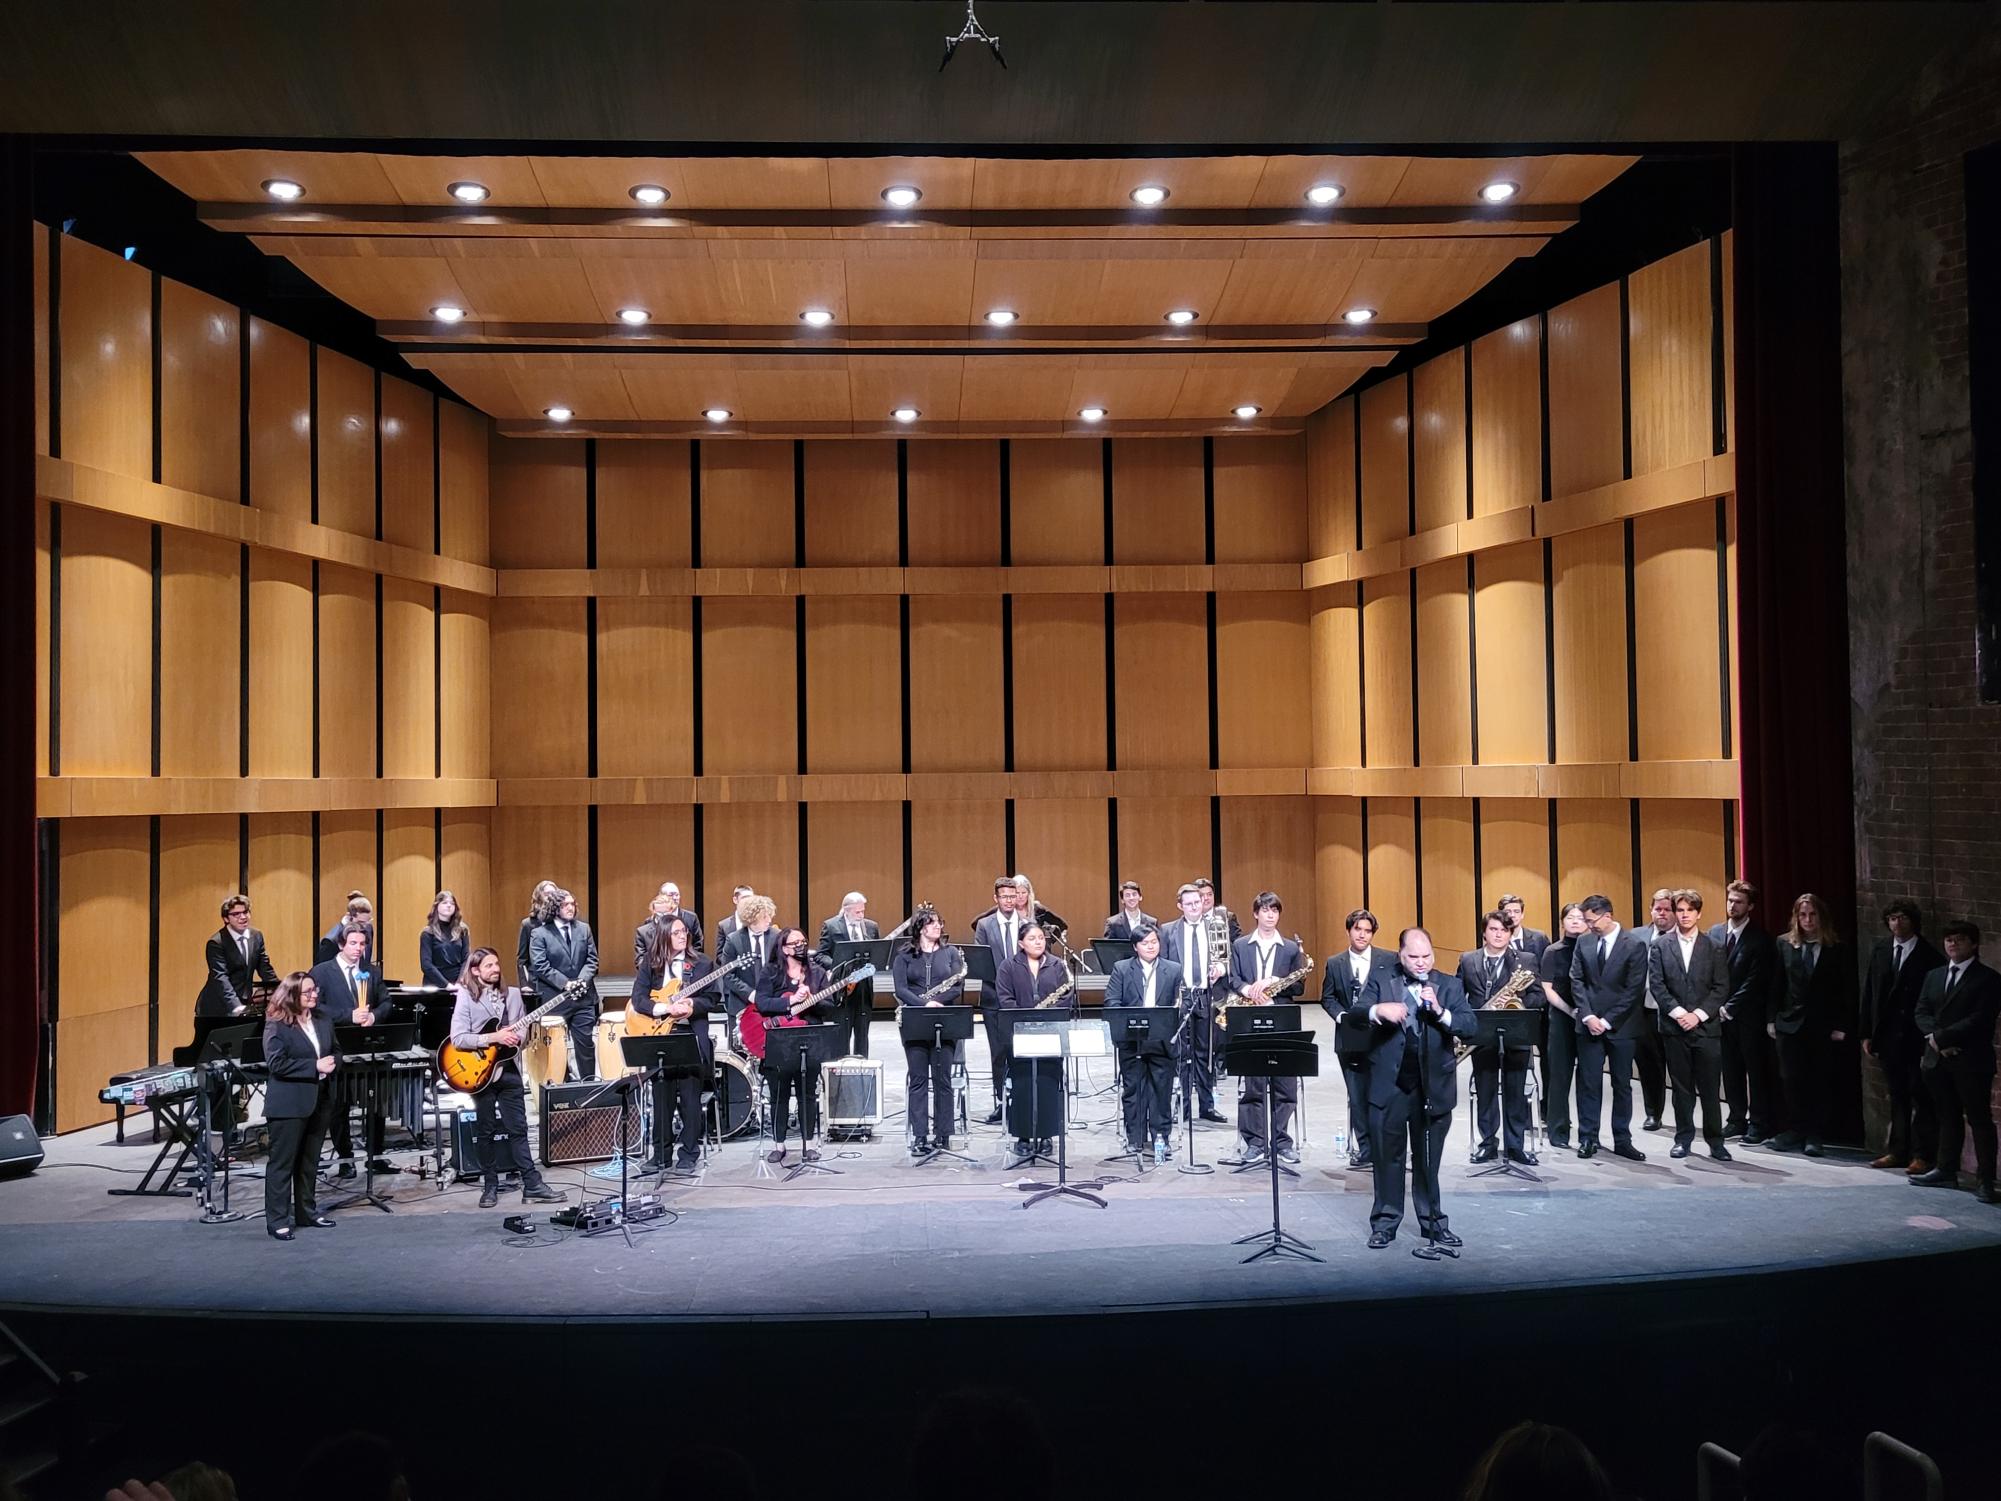 The Moorpark College Orchestra, Jazz Ensemble,
Andrew Synoweic, Virginia Figueiredo and Director Brendan McMullin standing for their final bow.